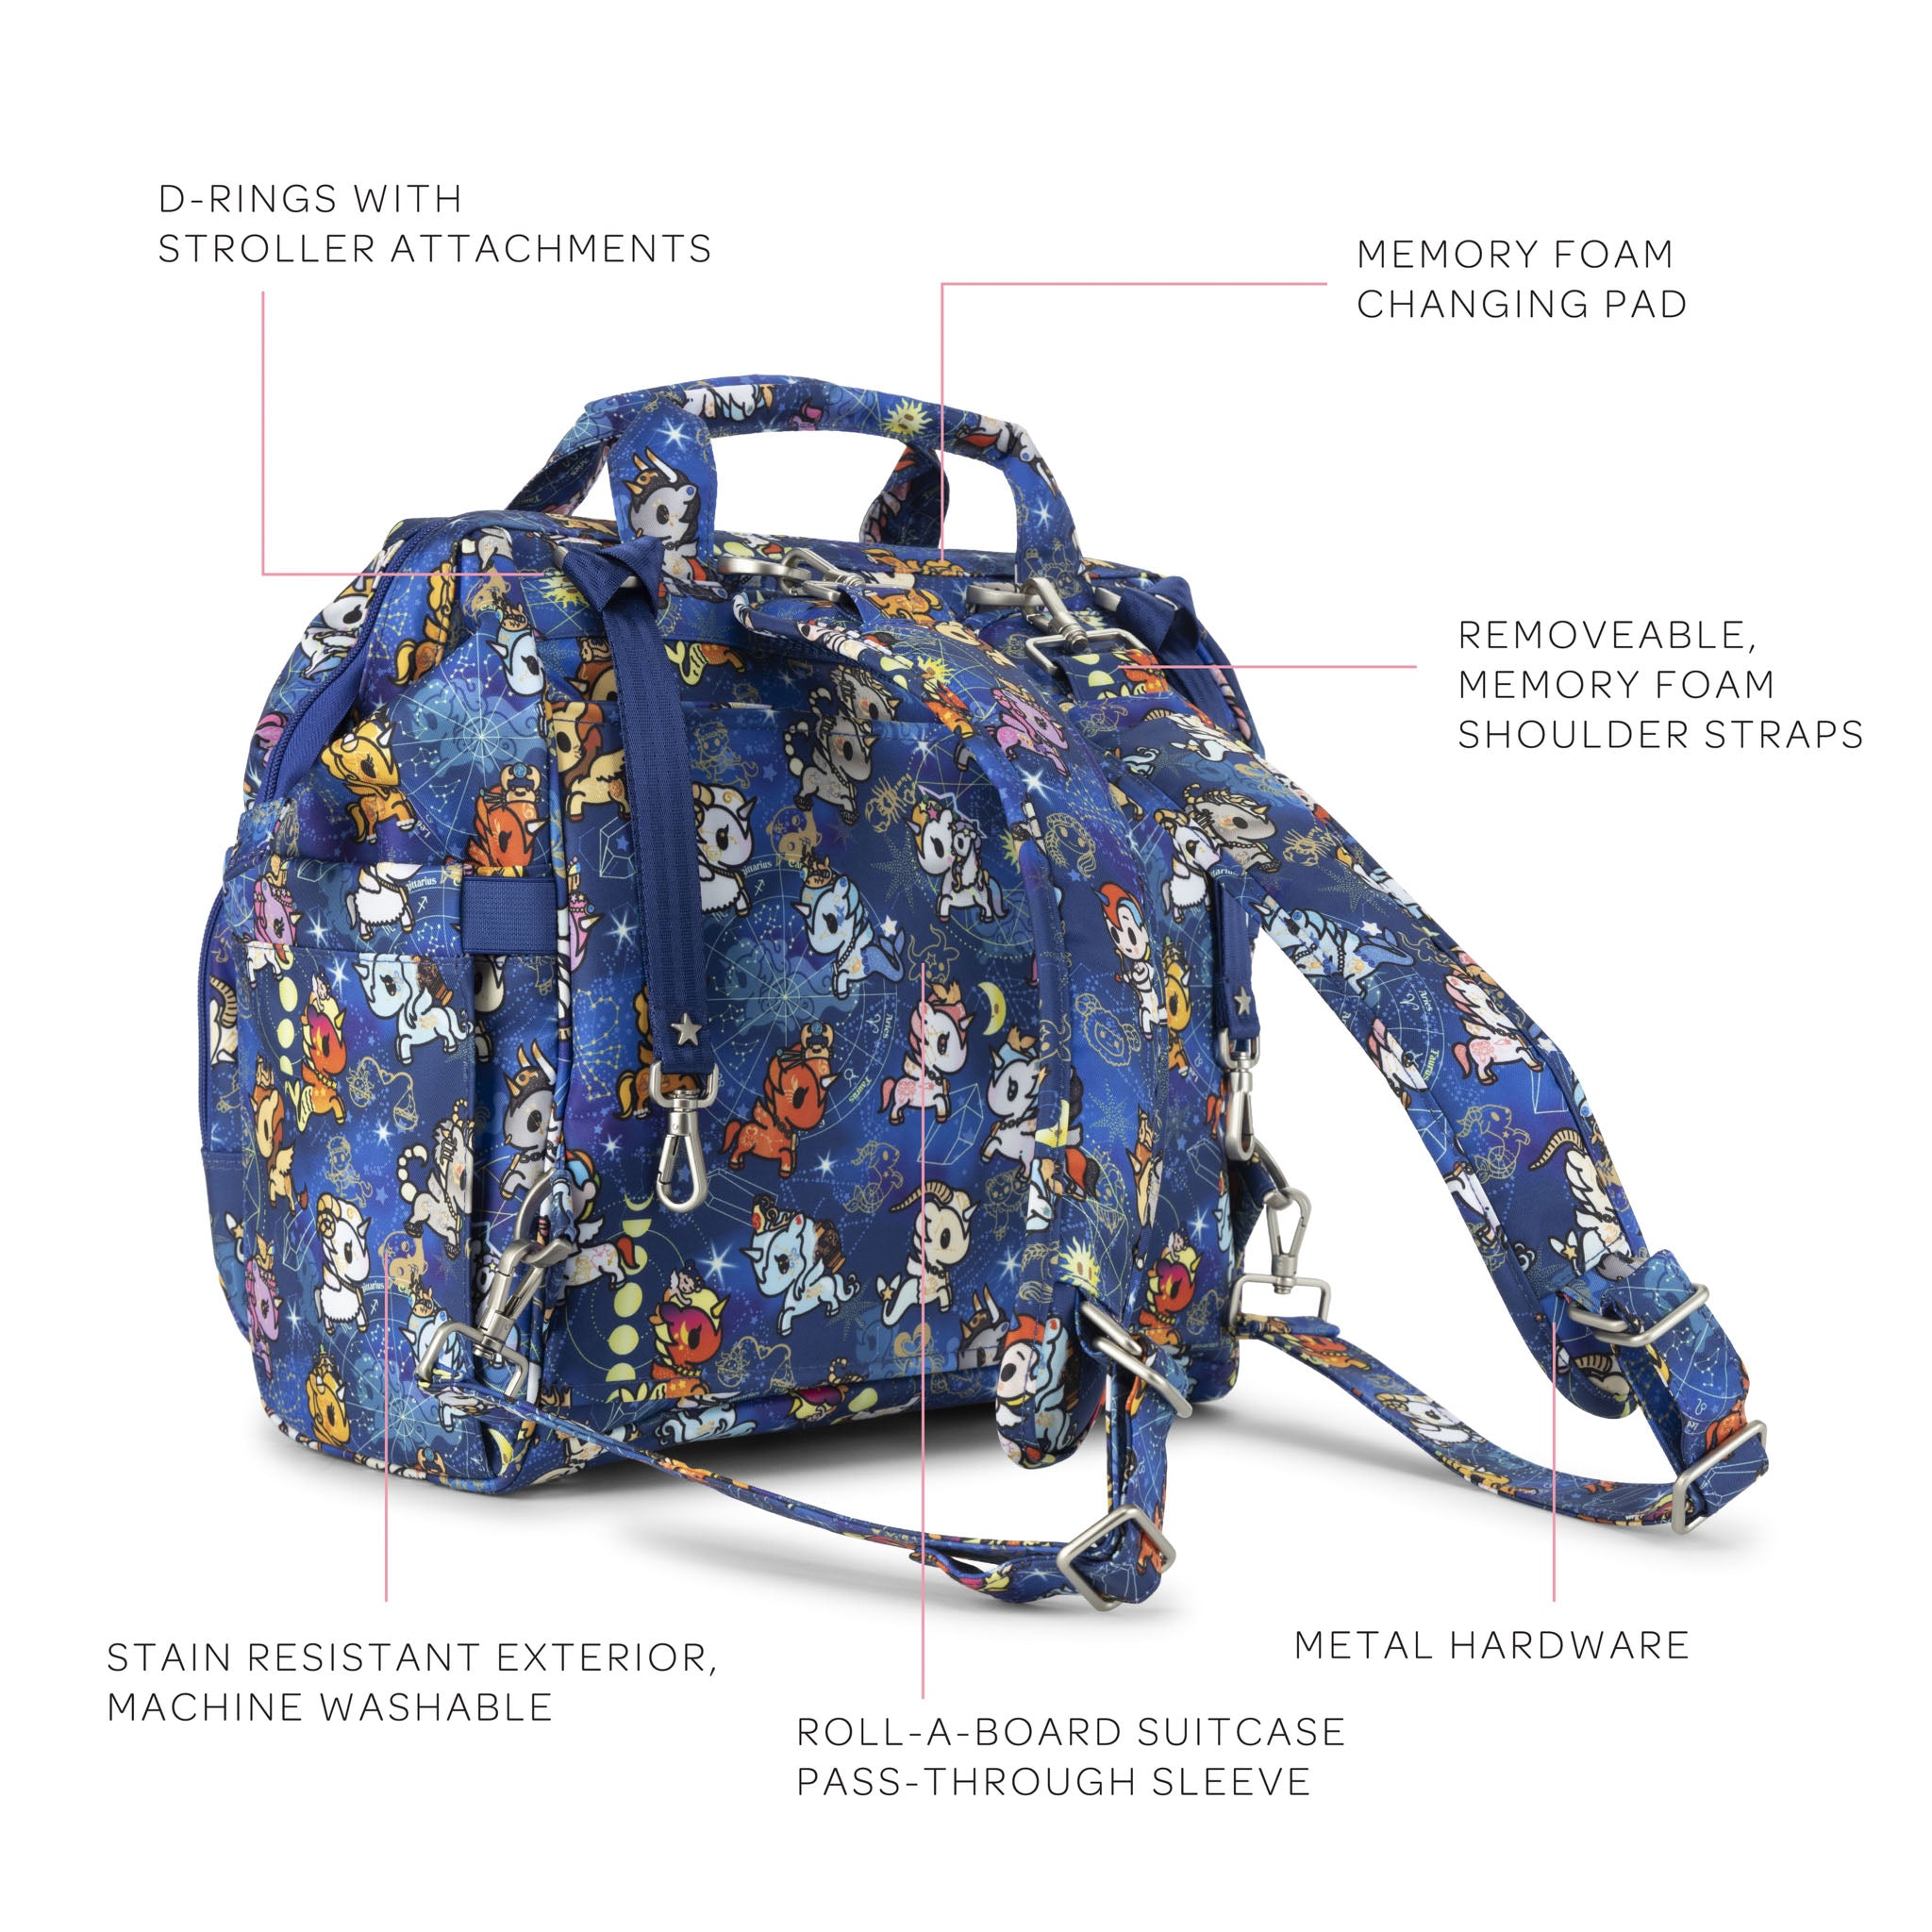 This image showcases the specs and features of the Dr. B.F.F. diaper bag, which features the colorful design of Kawaii Princess Warriors against a gradient blue background.